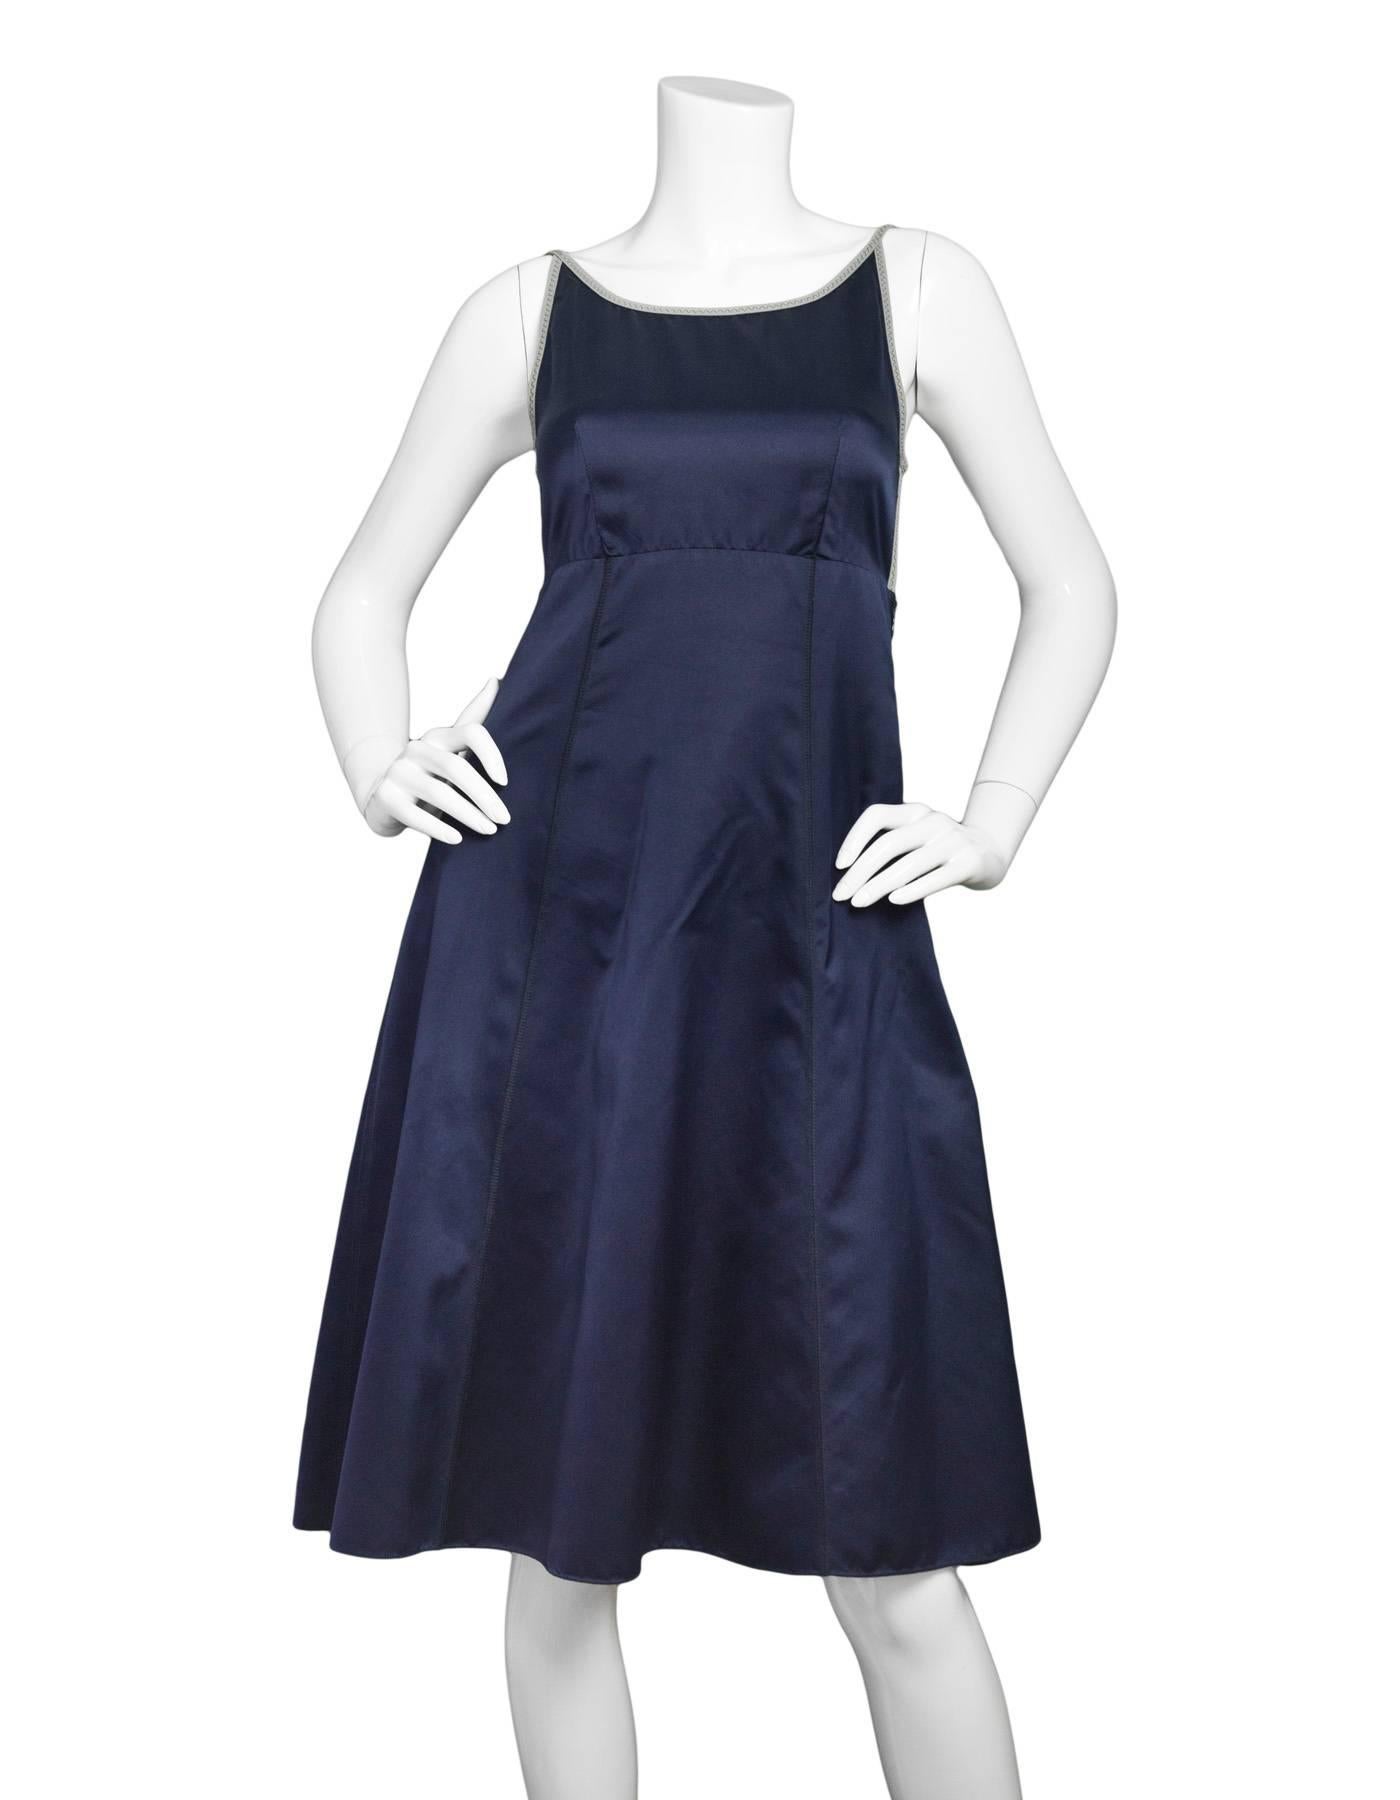 Prada Navy Silk Backless Spaghetti Strap Dress Sz IT38
Features tie detail at back

Made In: Italy
Color: Navy
Composition: 100% Silk
Lining: None
Closure/Opening: Hidden side zip closure, tie detail at back
Overall Condition: Excellent pre-owned